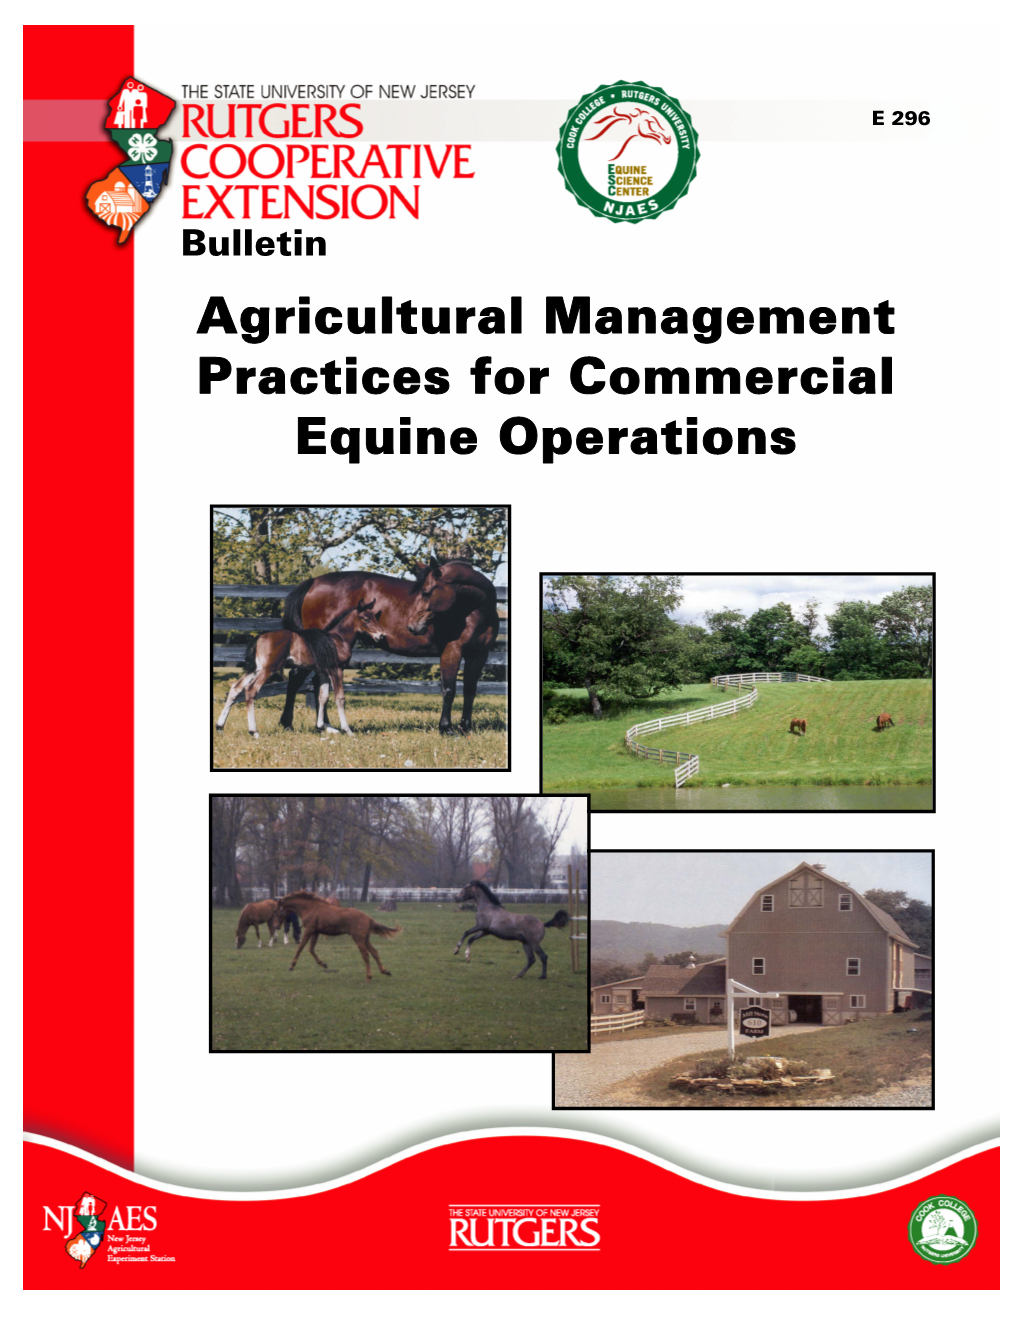 Agricultural Management Practices for Commercial Equine Operations